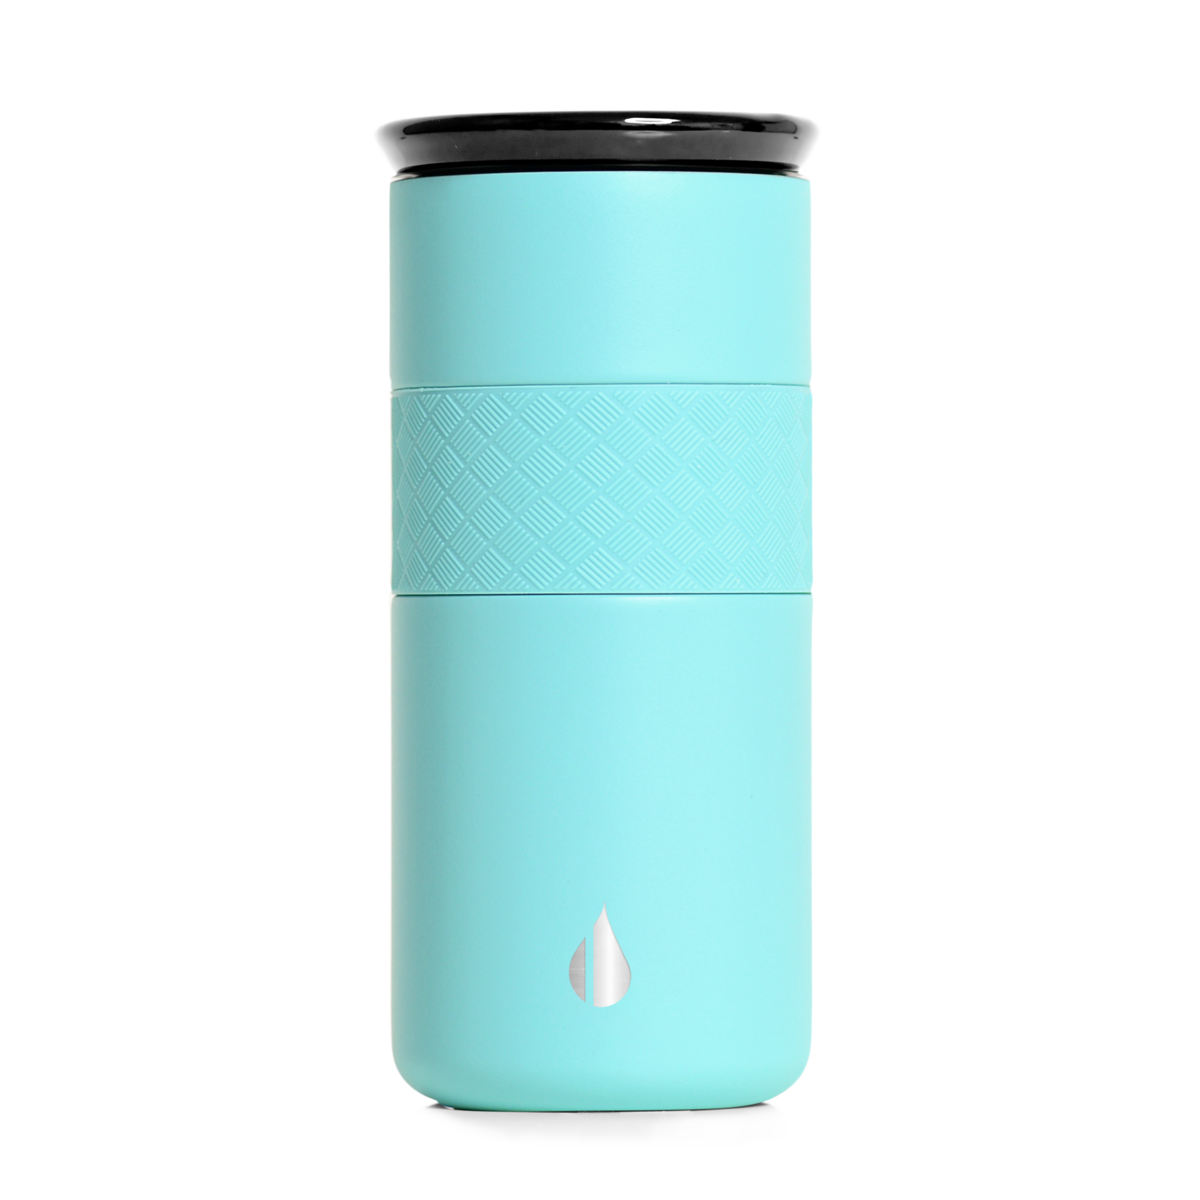 Elemental® 16 oz Artisan Stainless Steel Tumbler with Ceramic Lid in robins egg